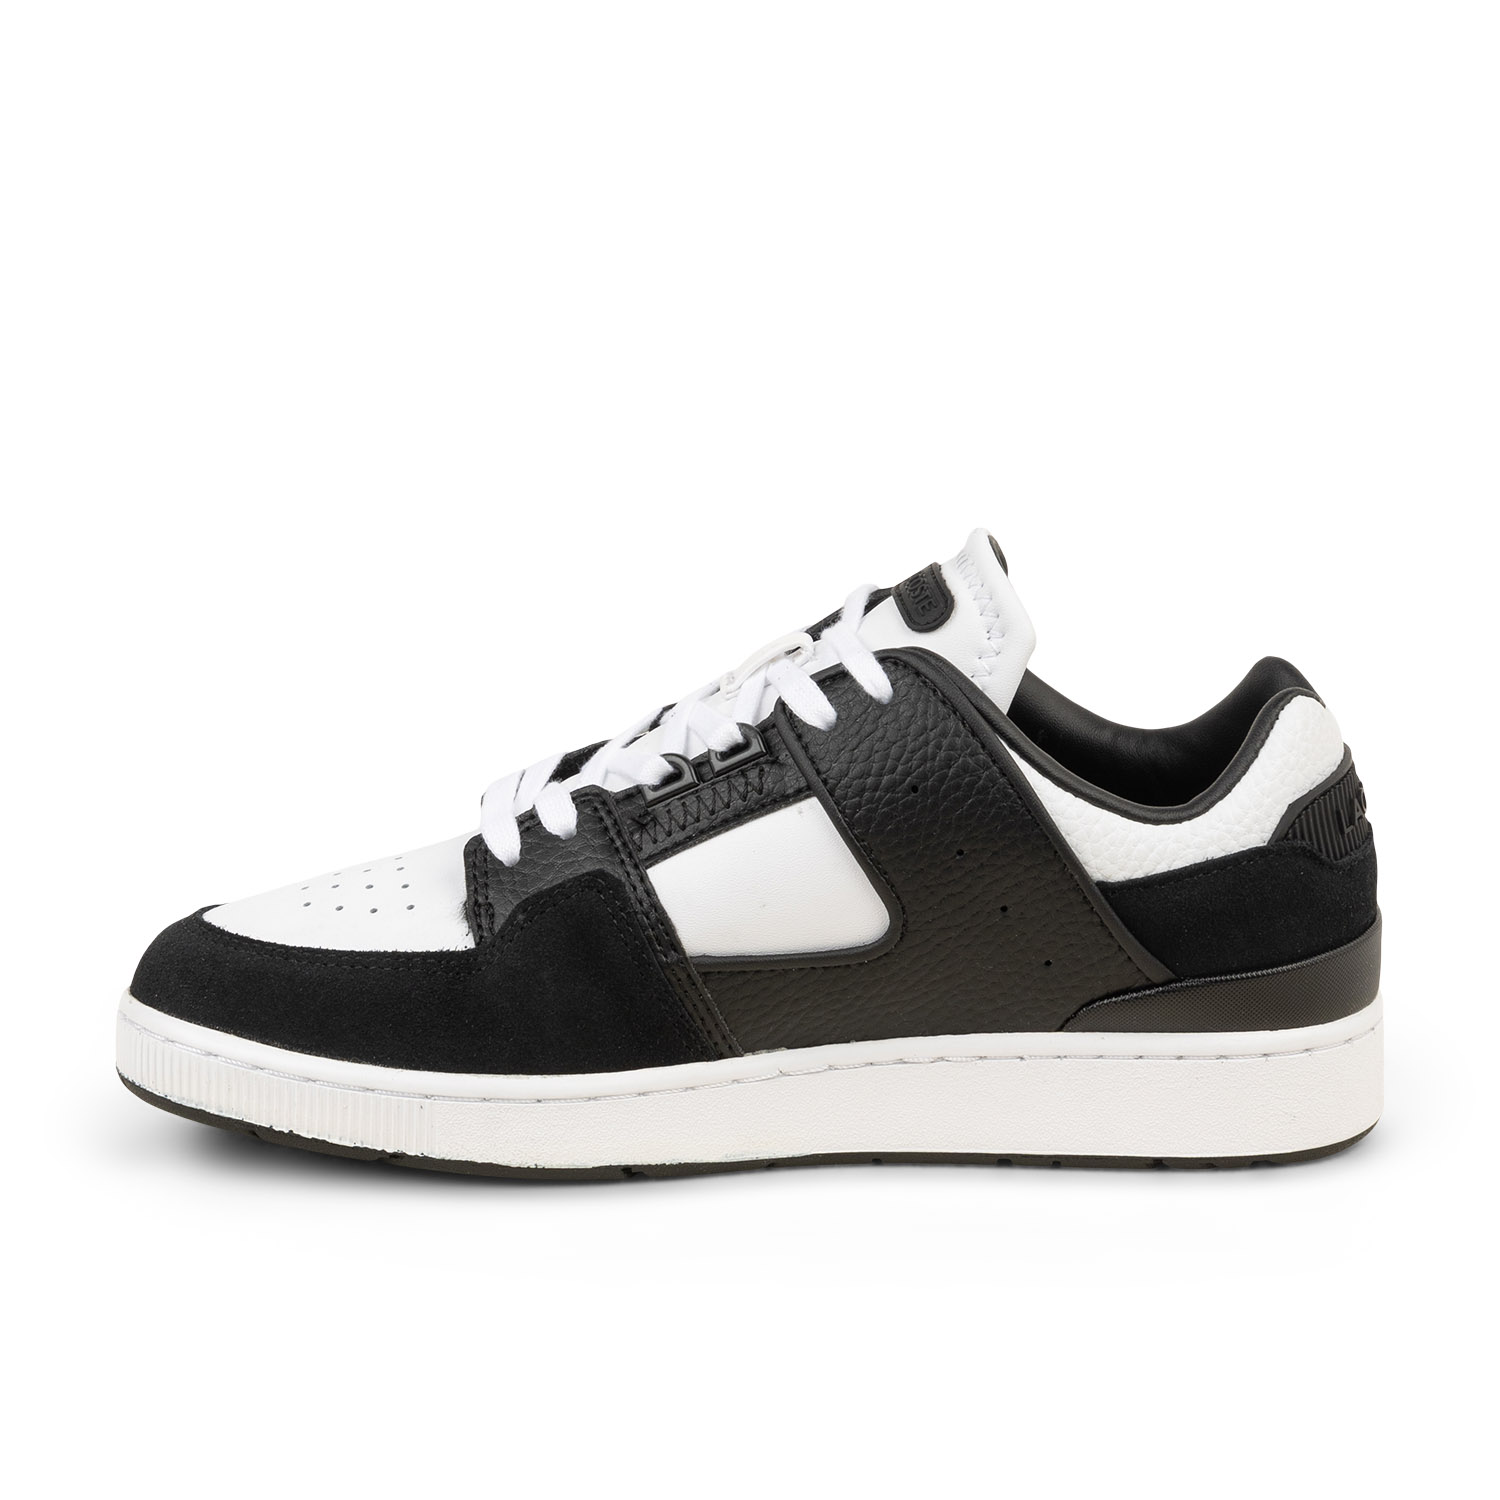 04 - COURT CAGE - LACOSTE - Baskets - Cuir